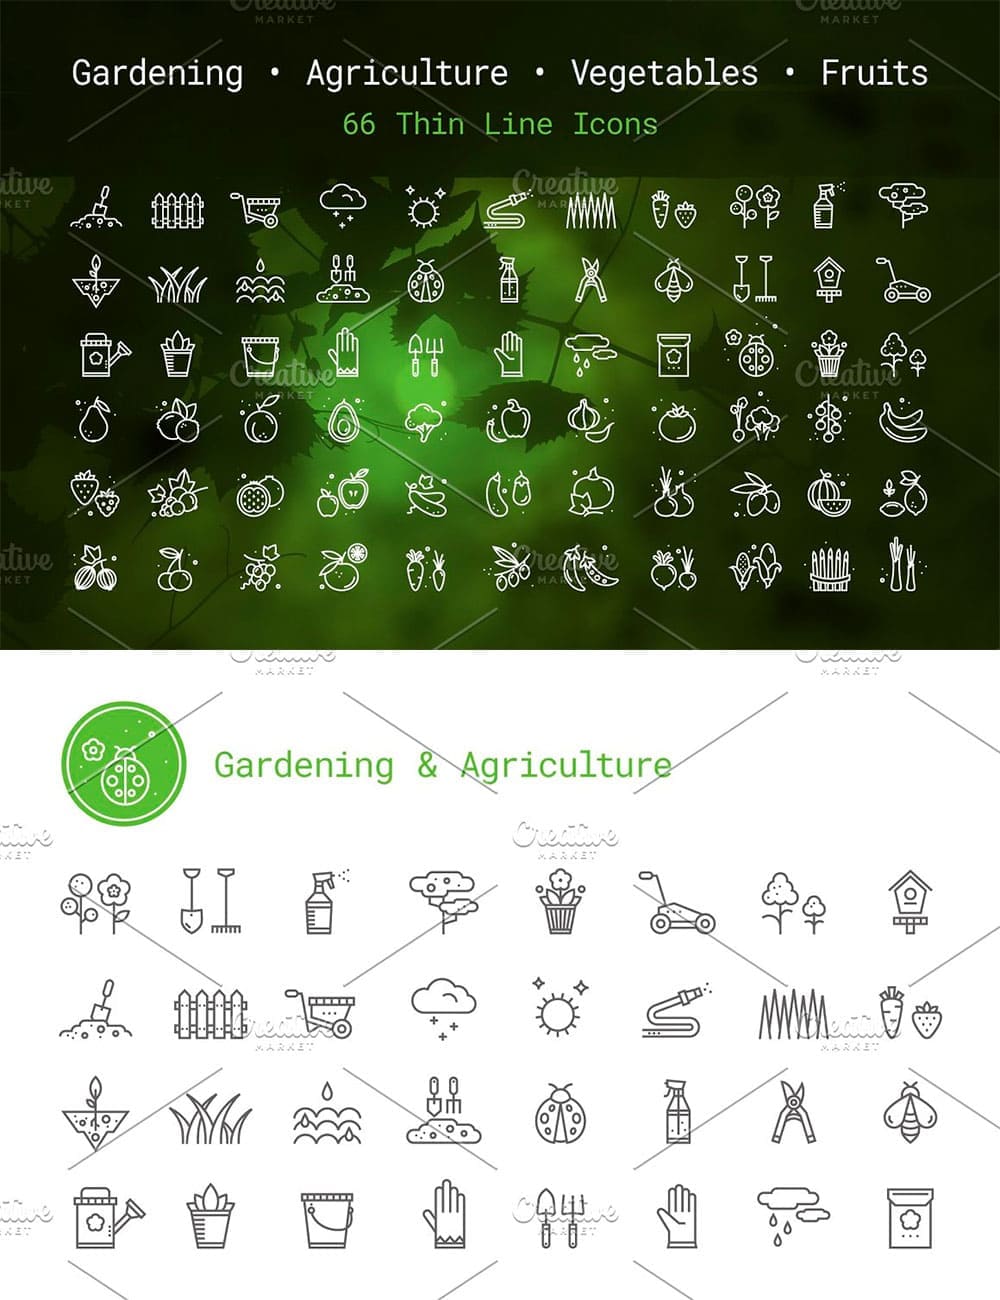 Gardening agriculture linear icons, picture for pinterest.